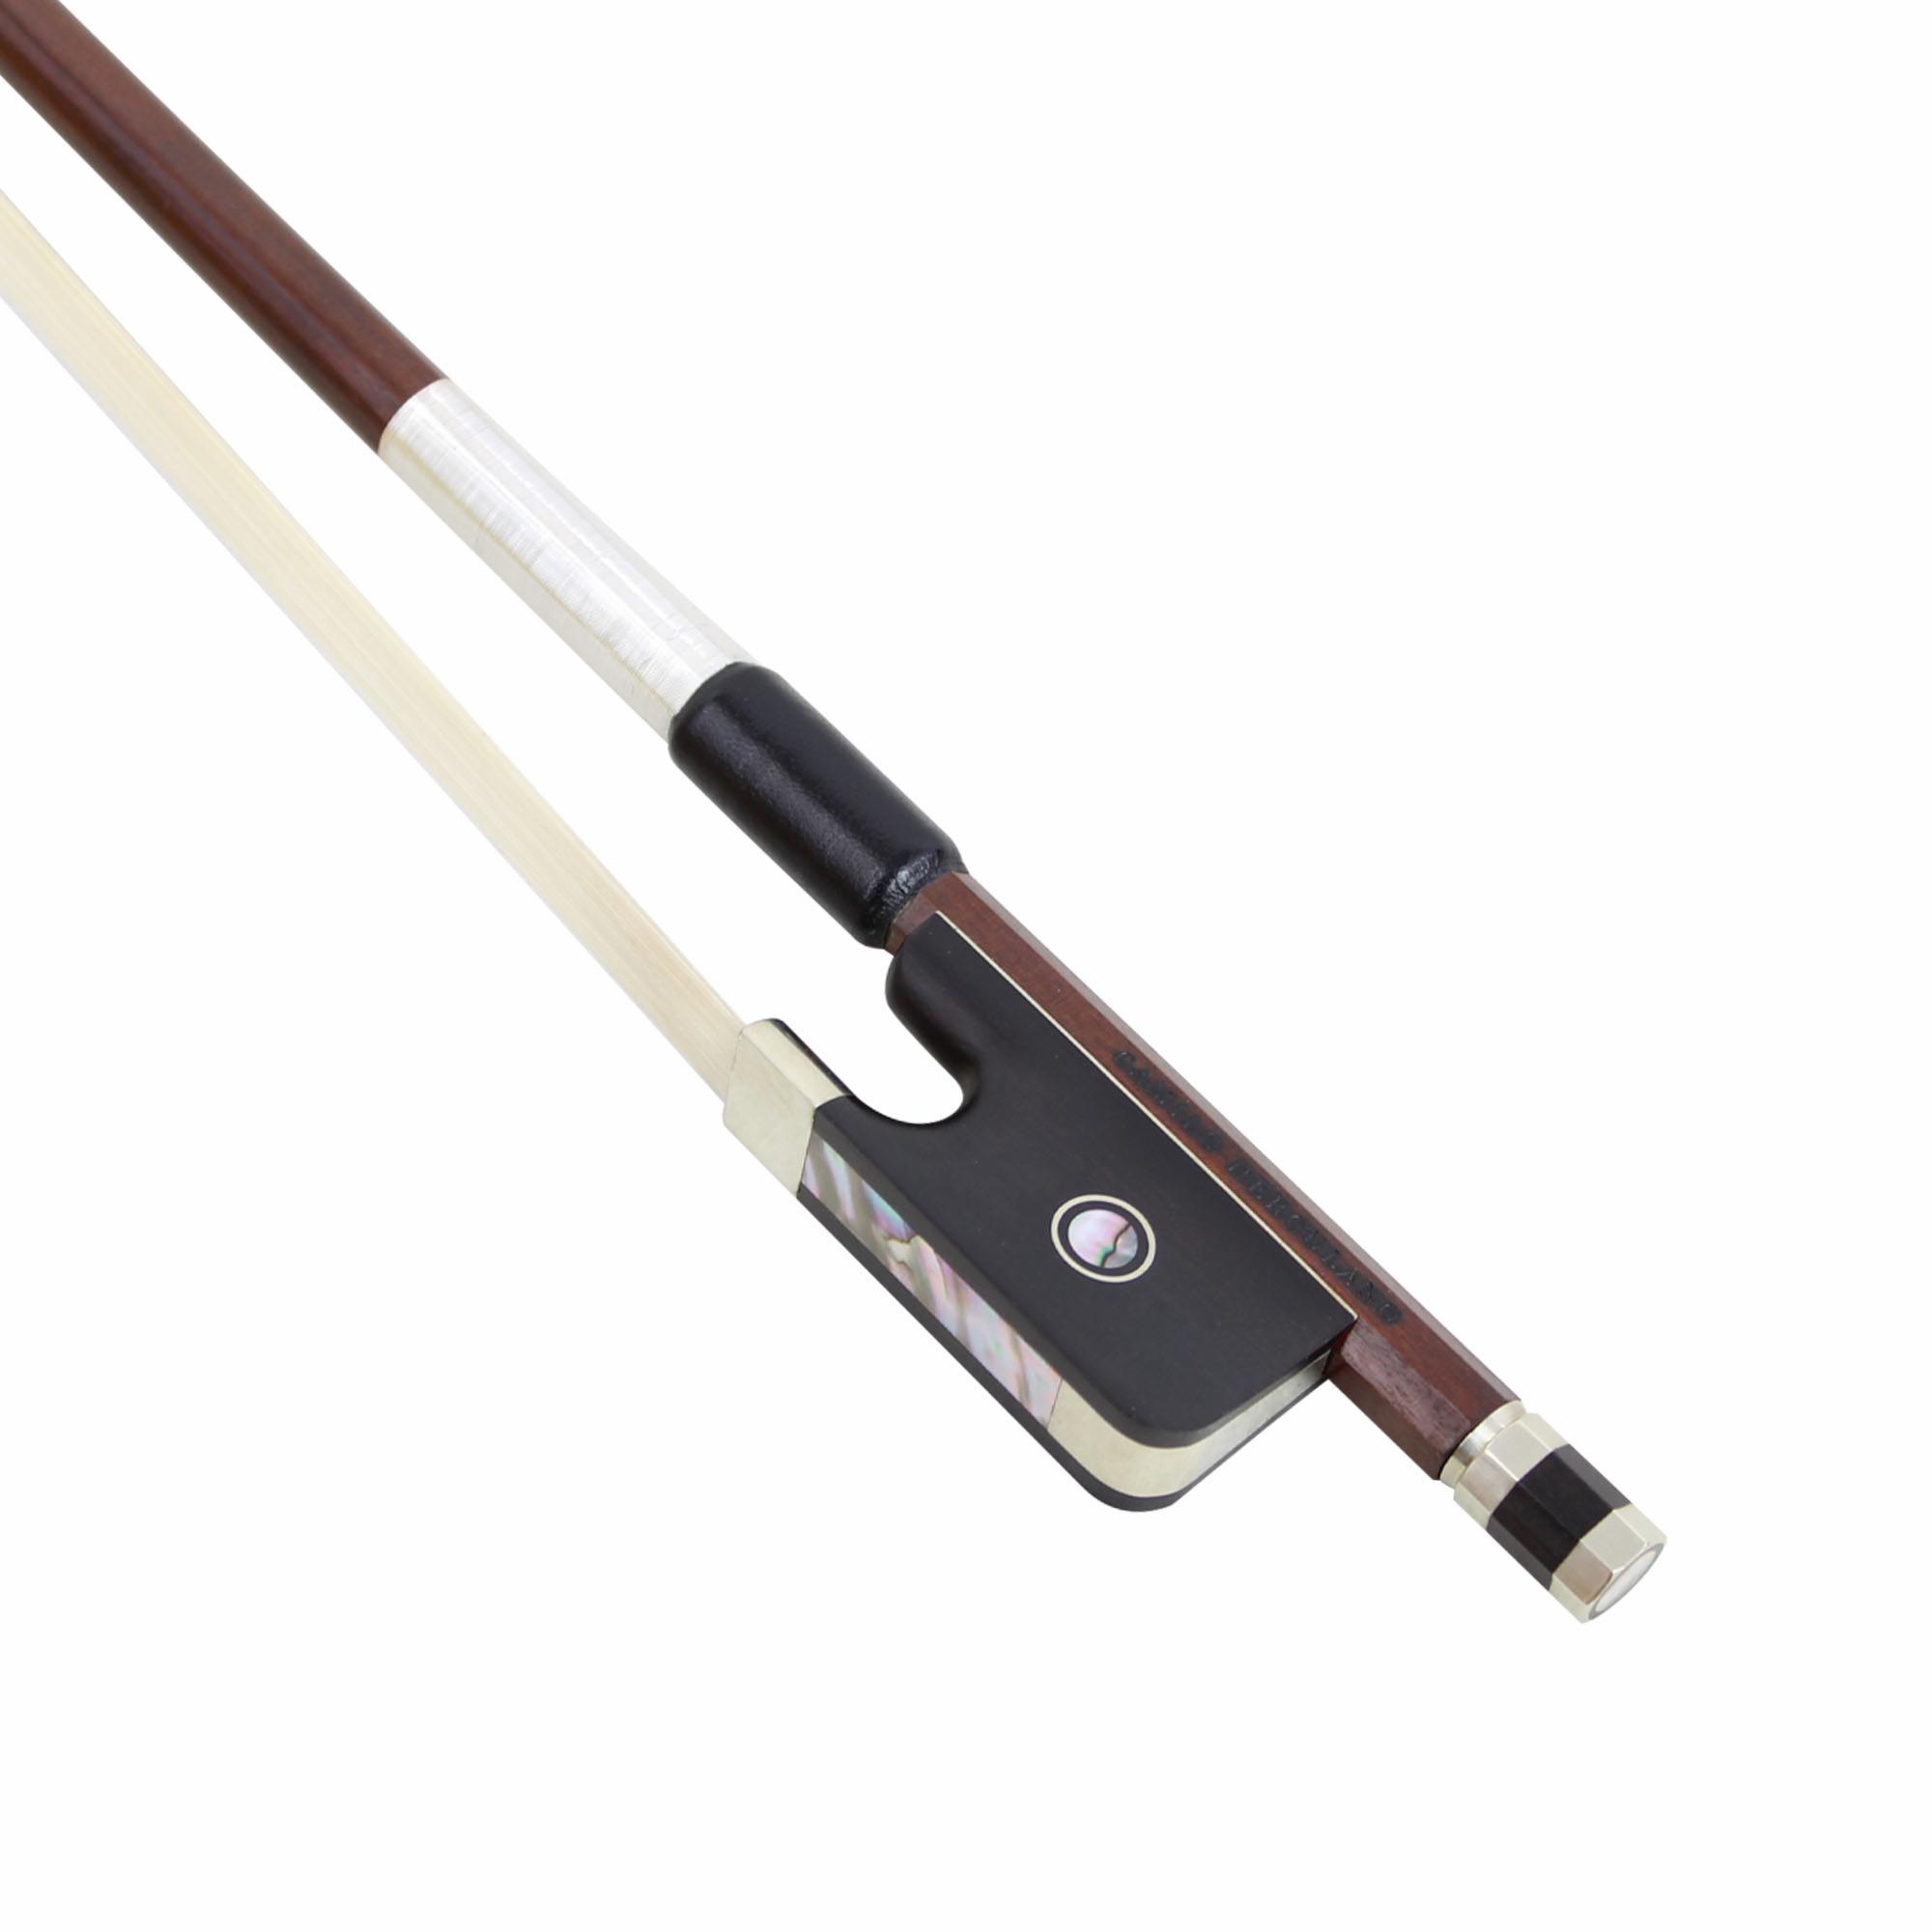 L'Archet IPE Fully mounted nickel  Cello Bow